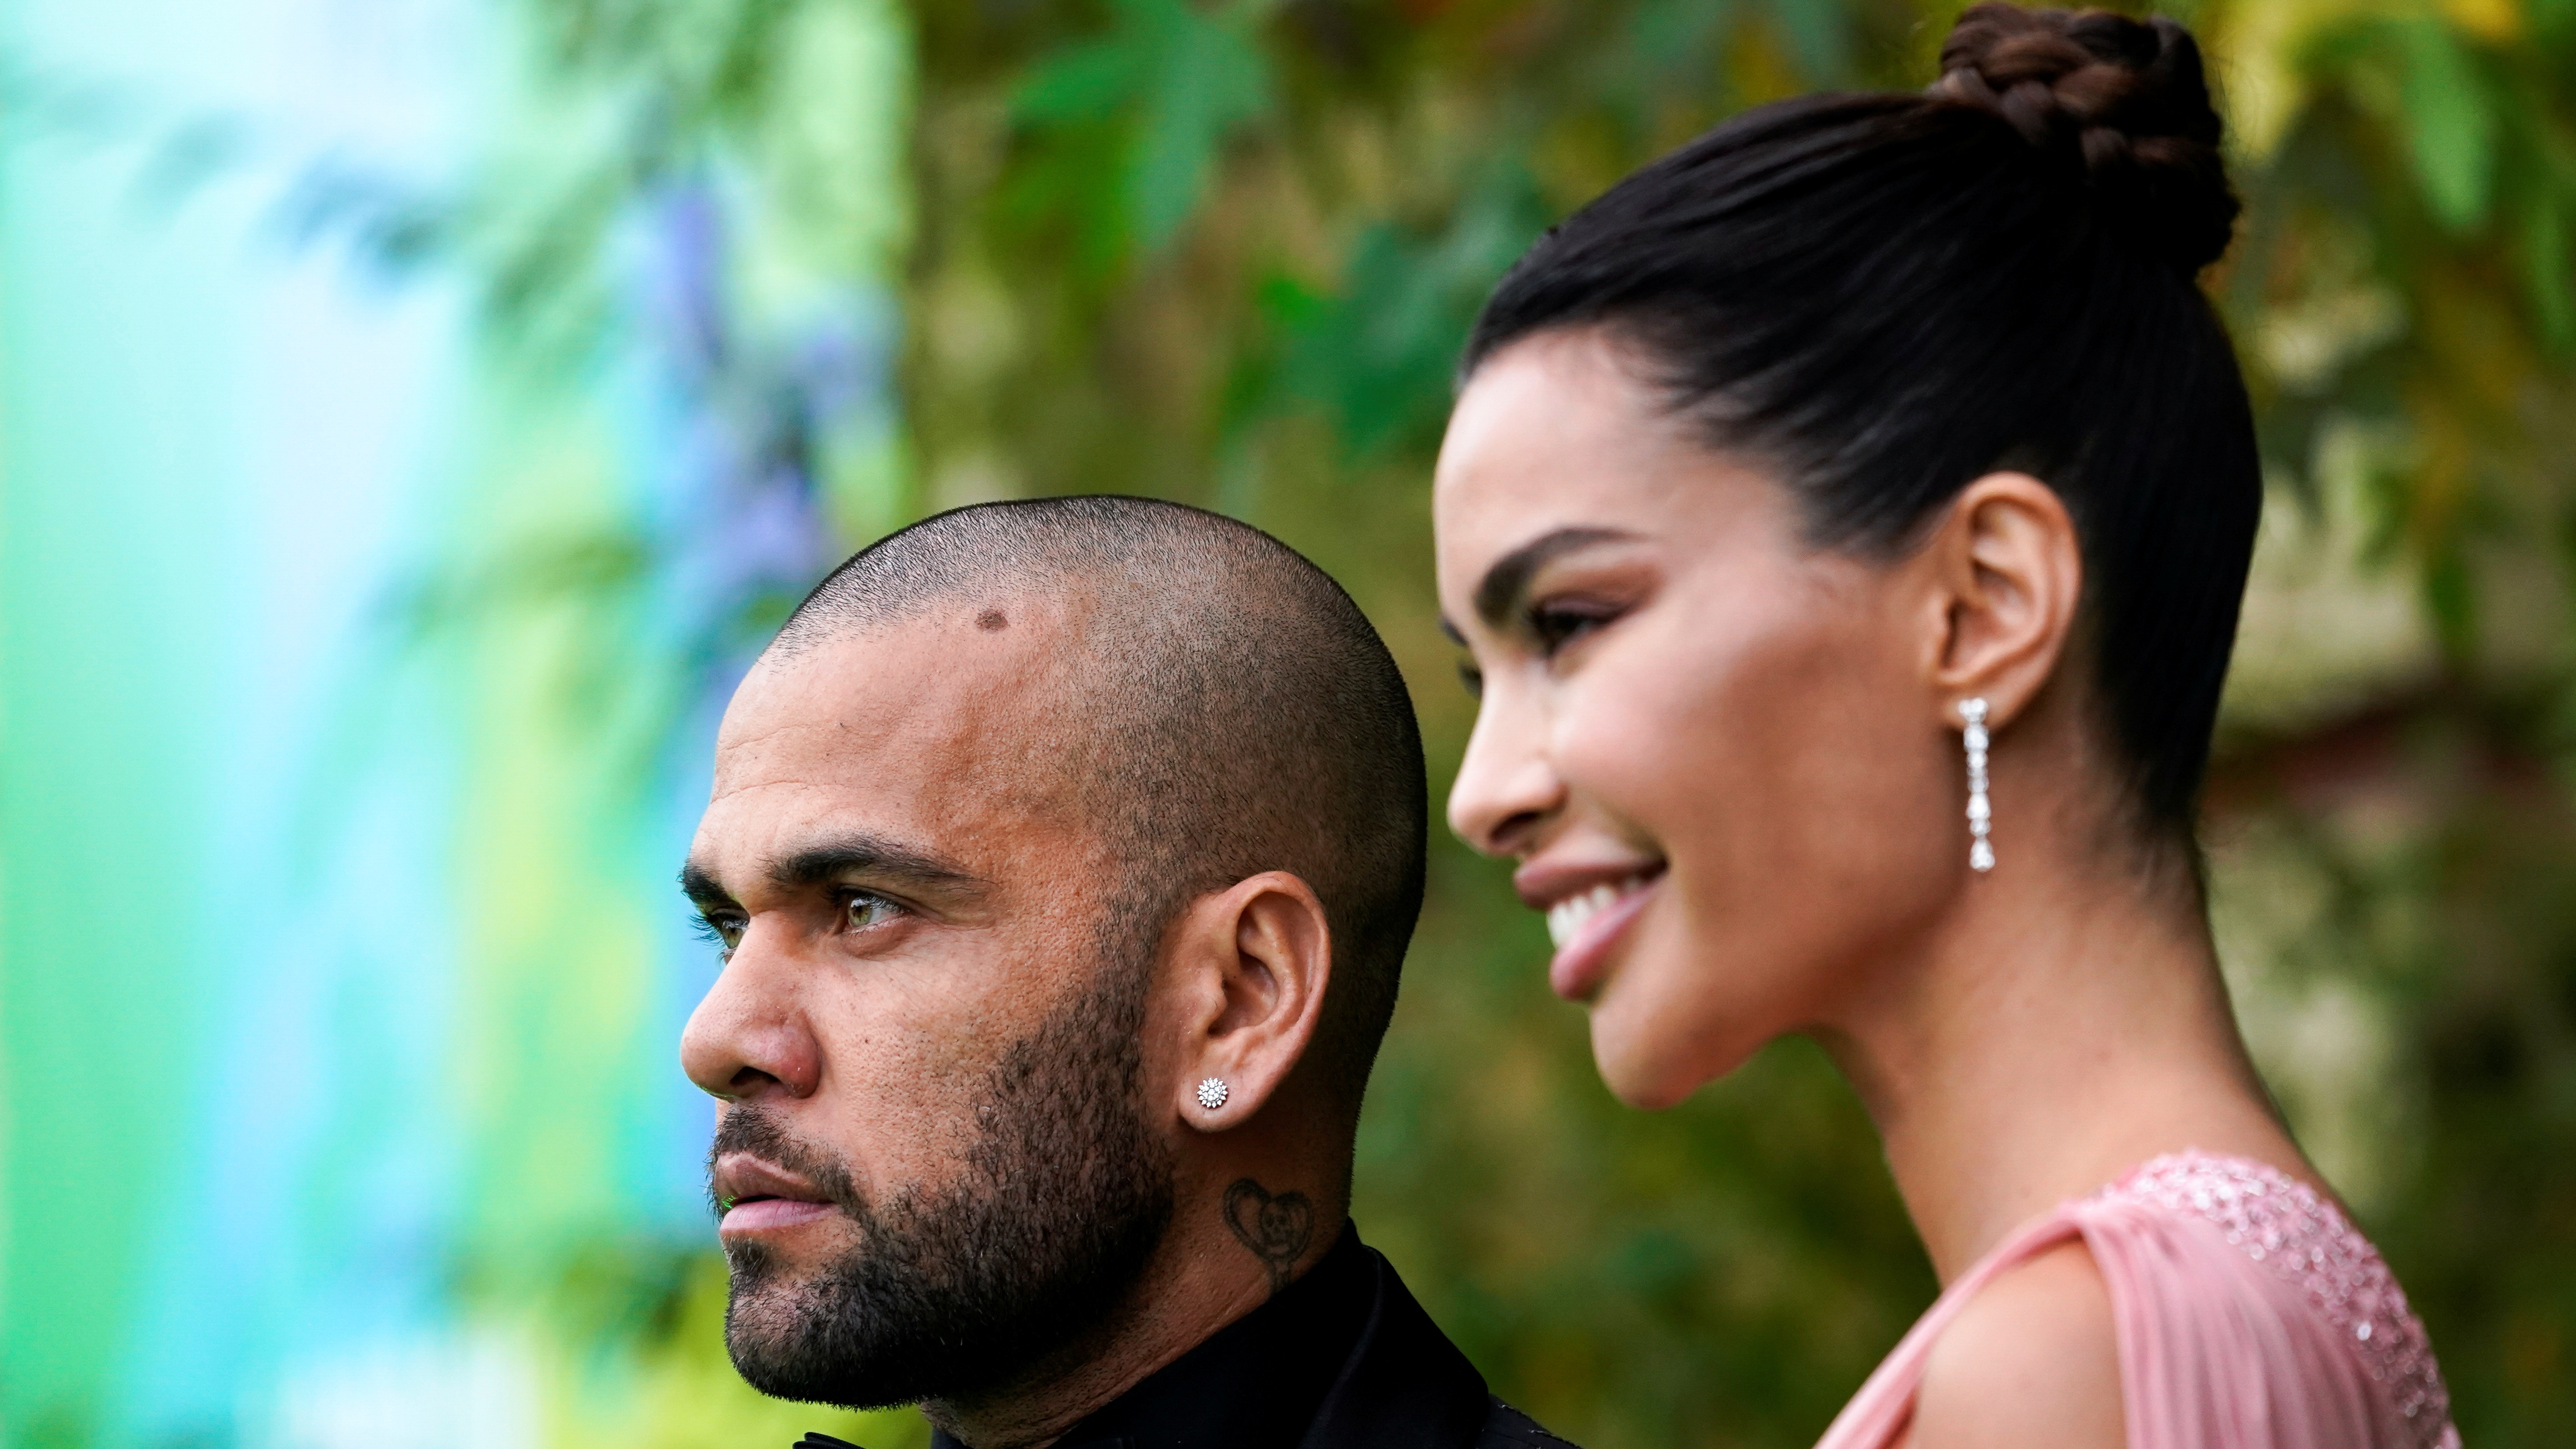 Football player Dani Alves with his wife Joana Sanz attend the first Earthshot awards ceremony at Alexandra Palace in London, Britain October 17, 2021. Picture taken October 17, 2021. Alberto Pezzali/Pool via REUTERS